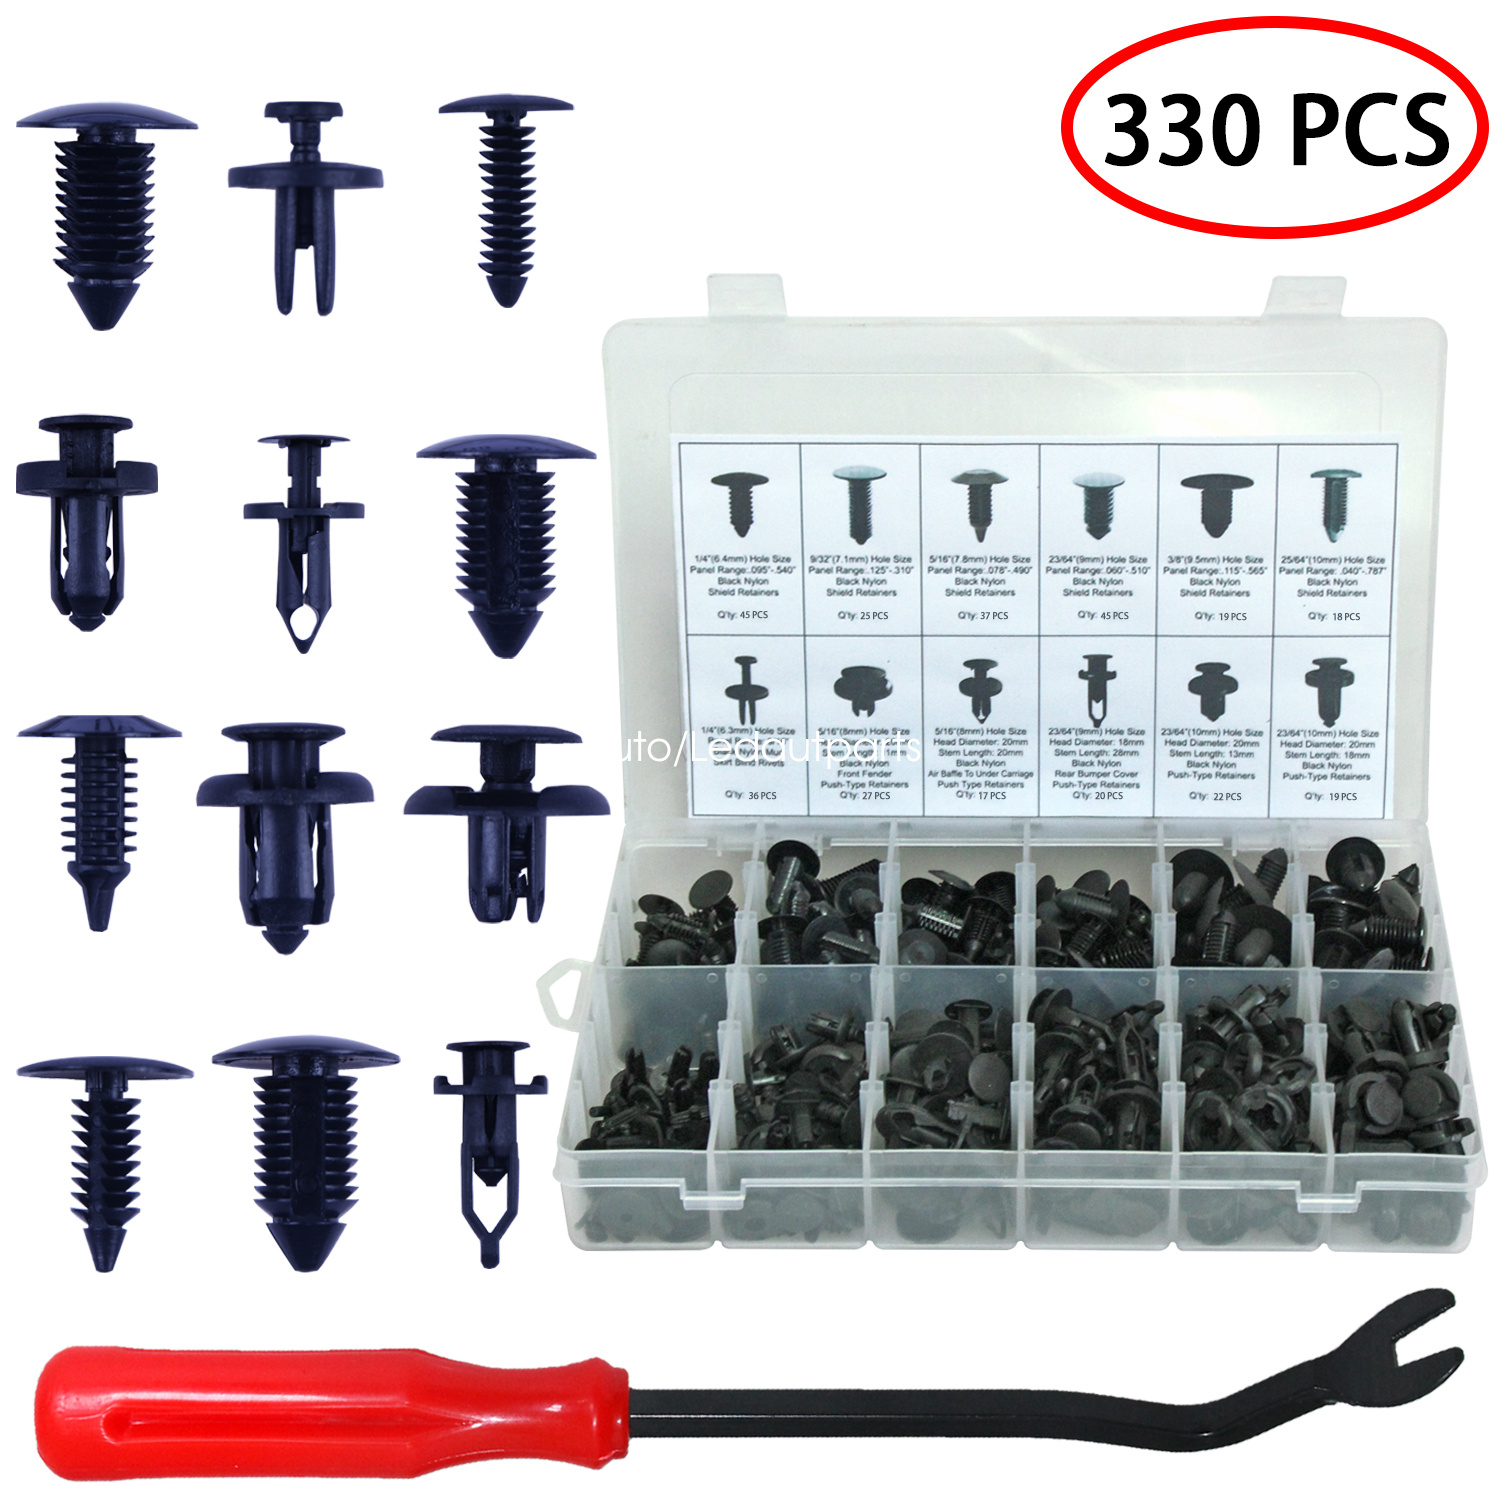 490 Auto Body Clips Push In Fasteners Retainer Assortment Bumper Fender Moulding